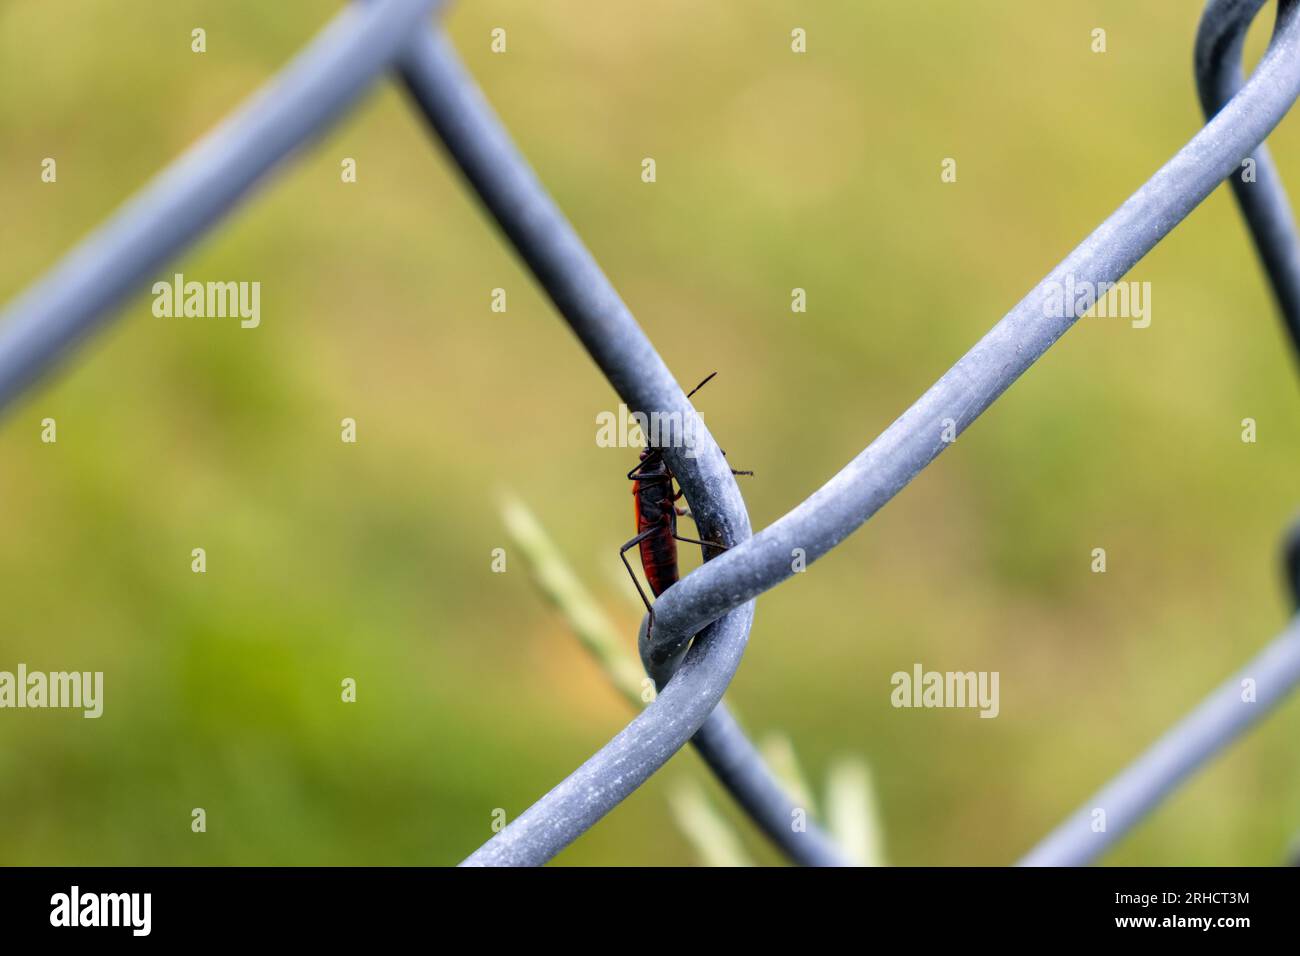 Red and black insect on chain link fence - close up shot - insect has red body and black legs and antennae - fence is gray and blurred in background - Stock Photo